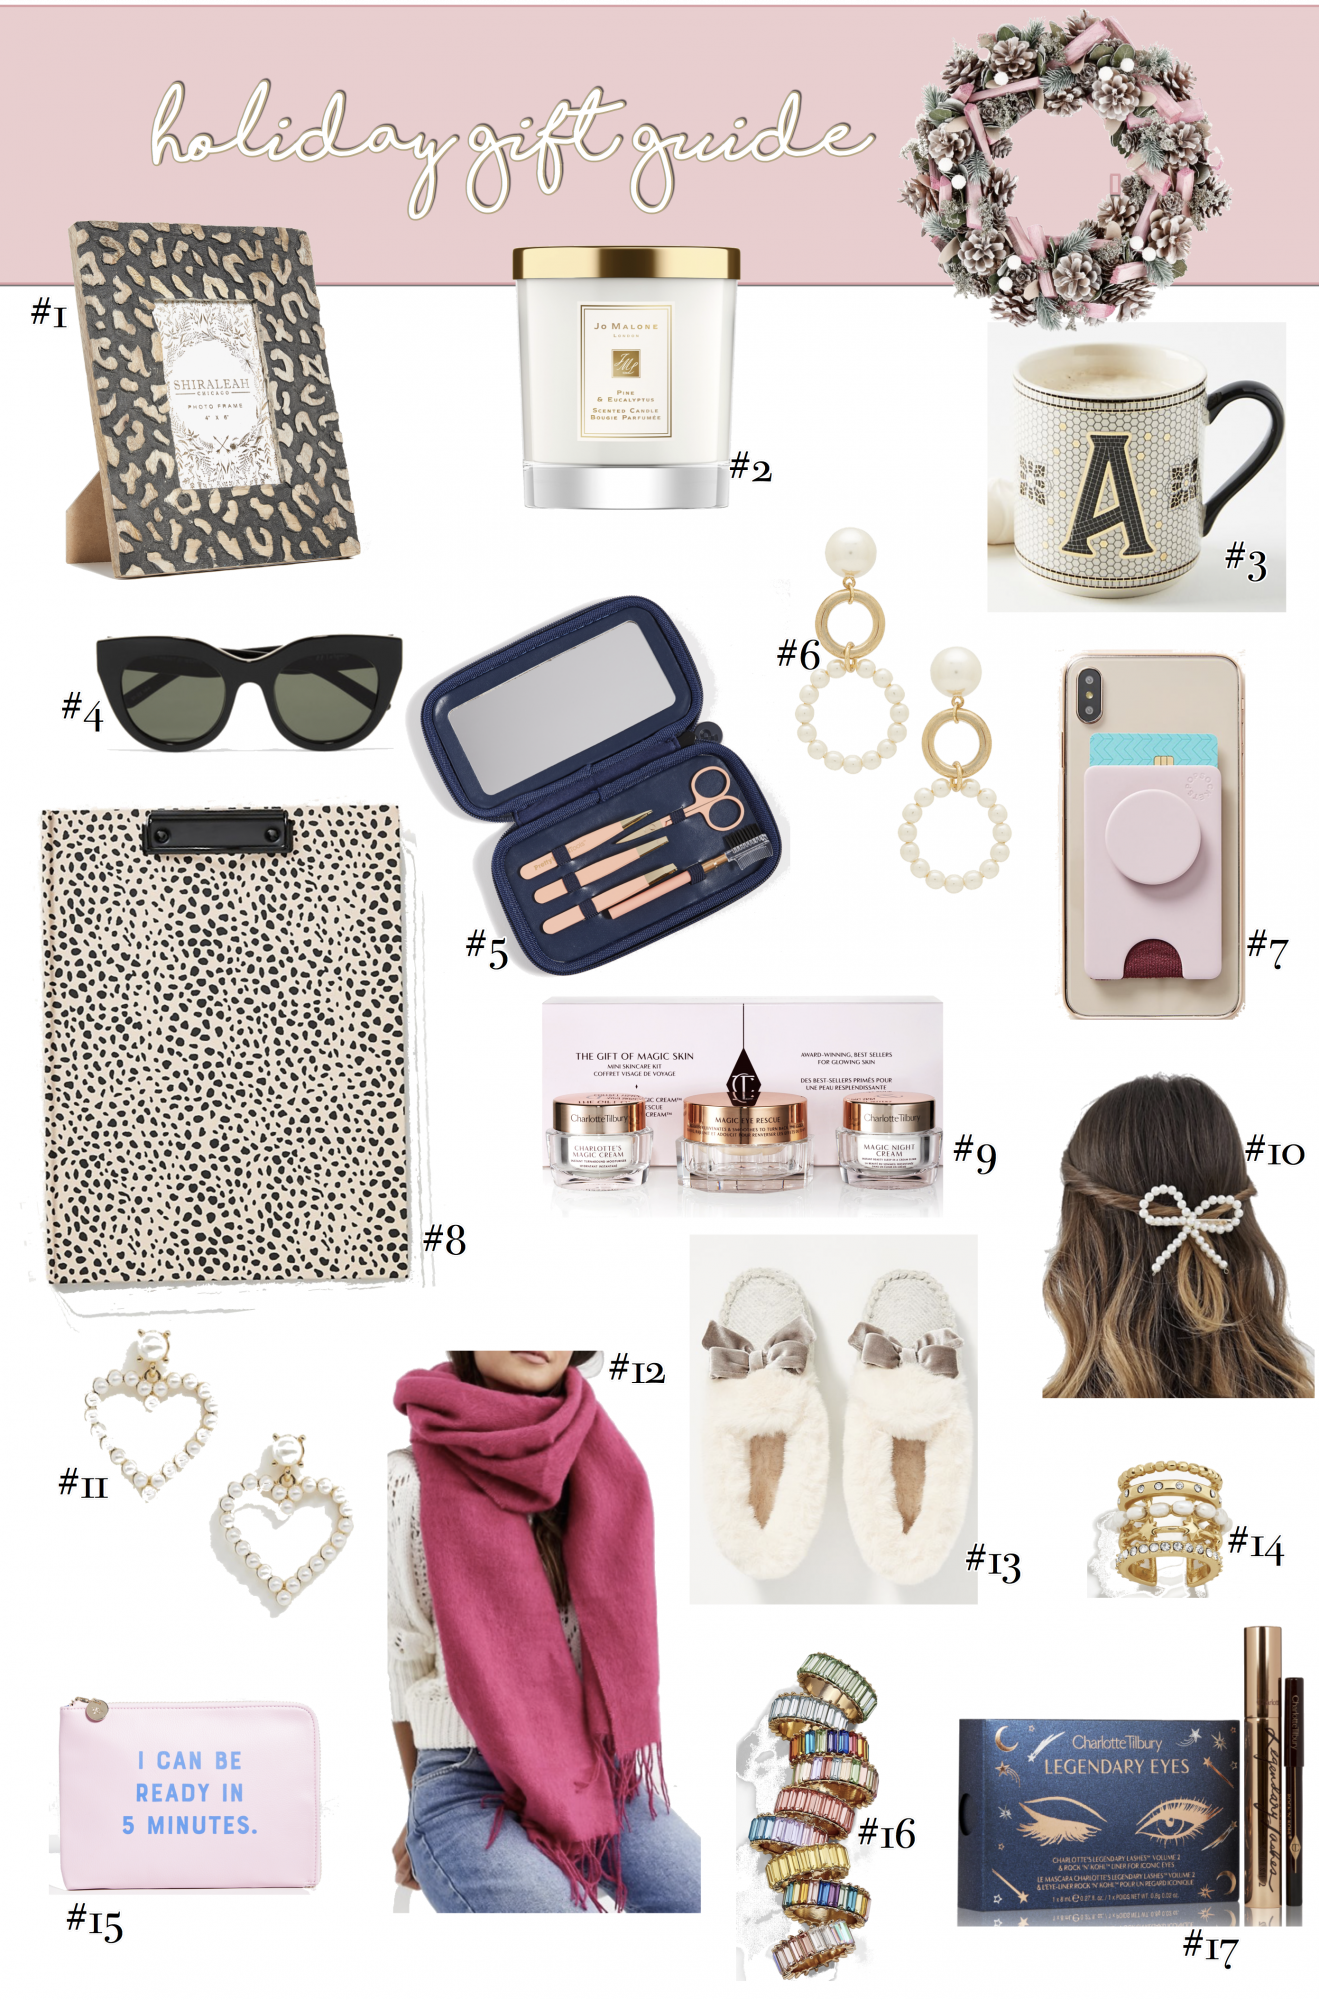 Top 17 Unique Gifts for Her, a Holiday gift guide featured by top US life and style blog, The Sweetest Thing. Christmas gift ideas 2019, Christmas gift guide, best holiday Christmas gifts women, gift ideas Christmas bloggers, Emily ann gemma